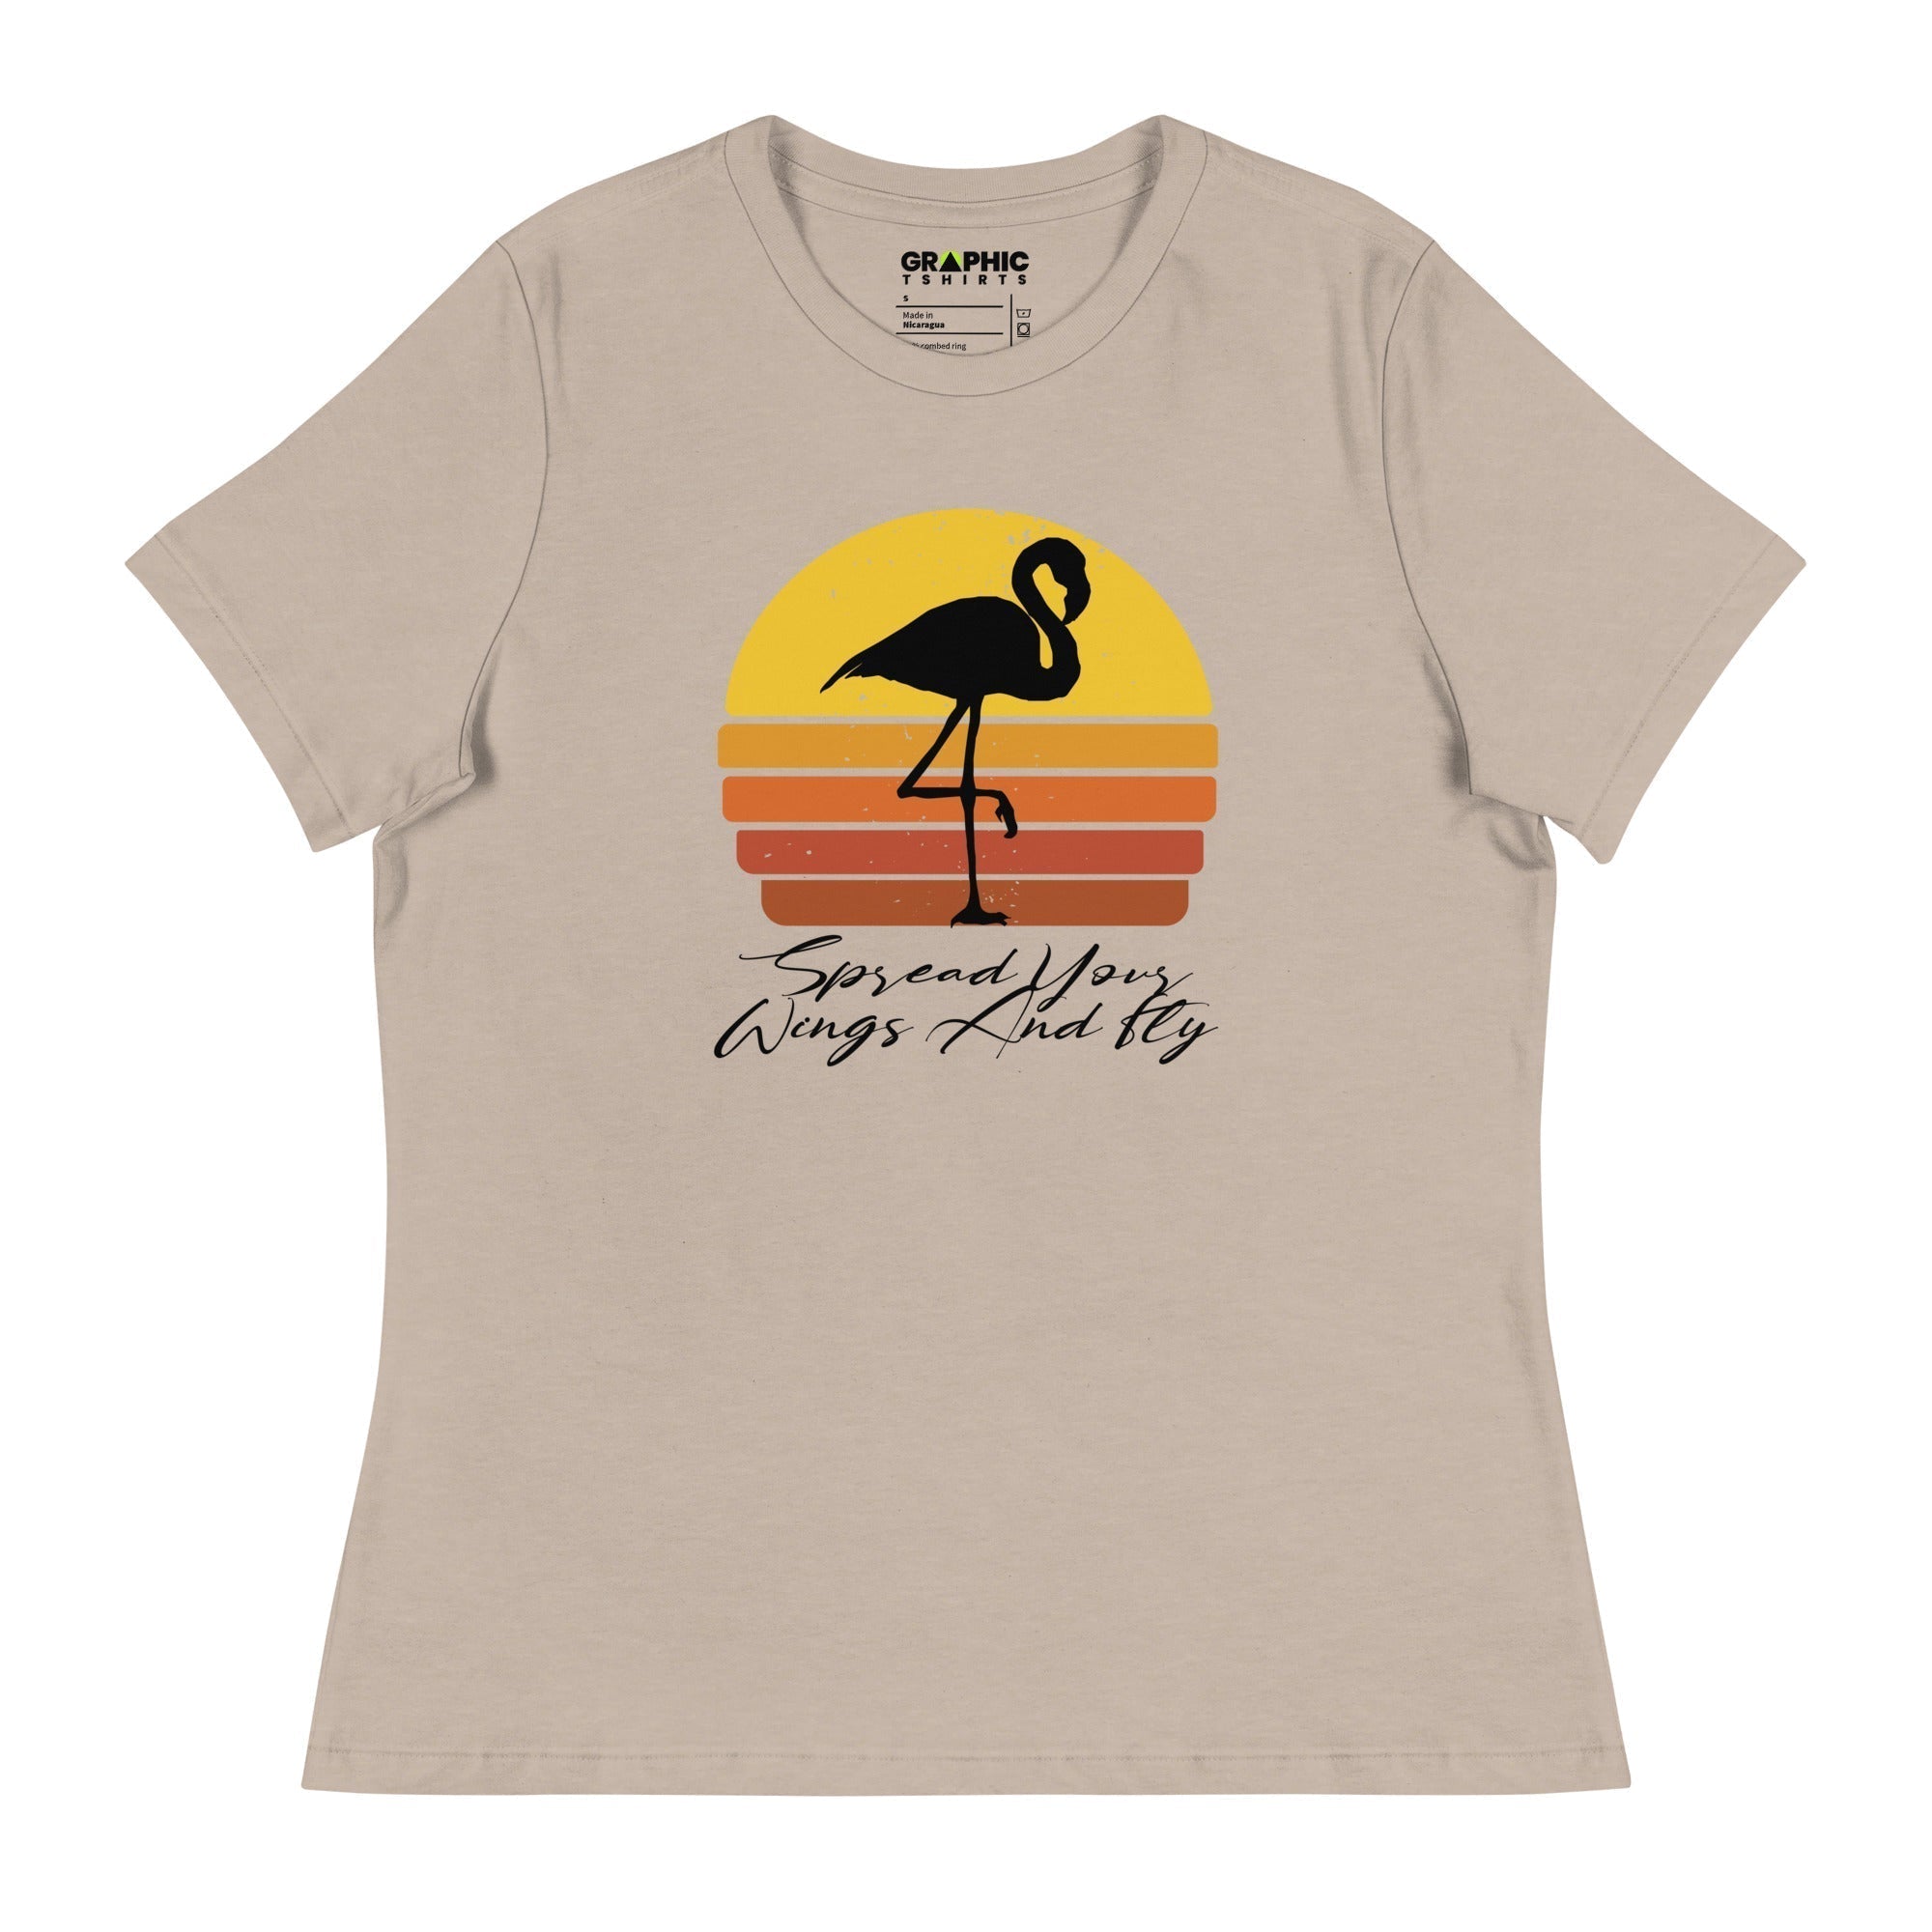 Women's Relaxed T-Shirt - Spread Your Wings And Fly - GRAPHIC T-SHIRTS